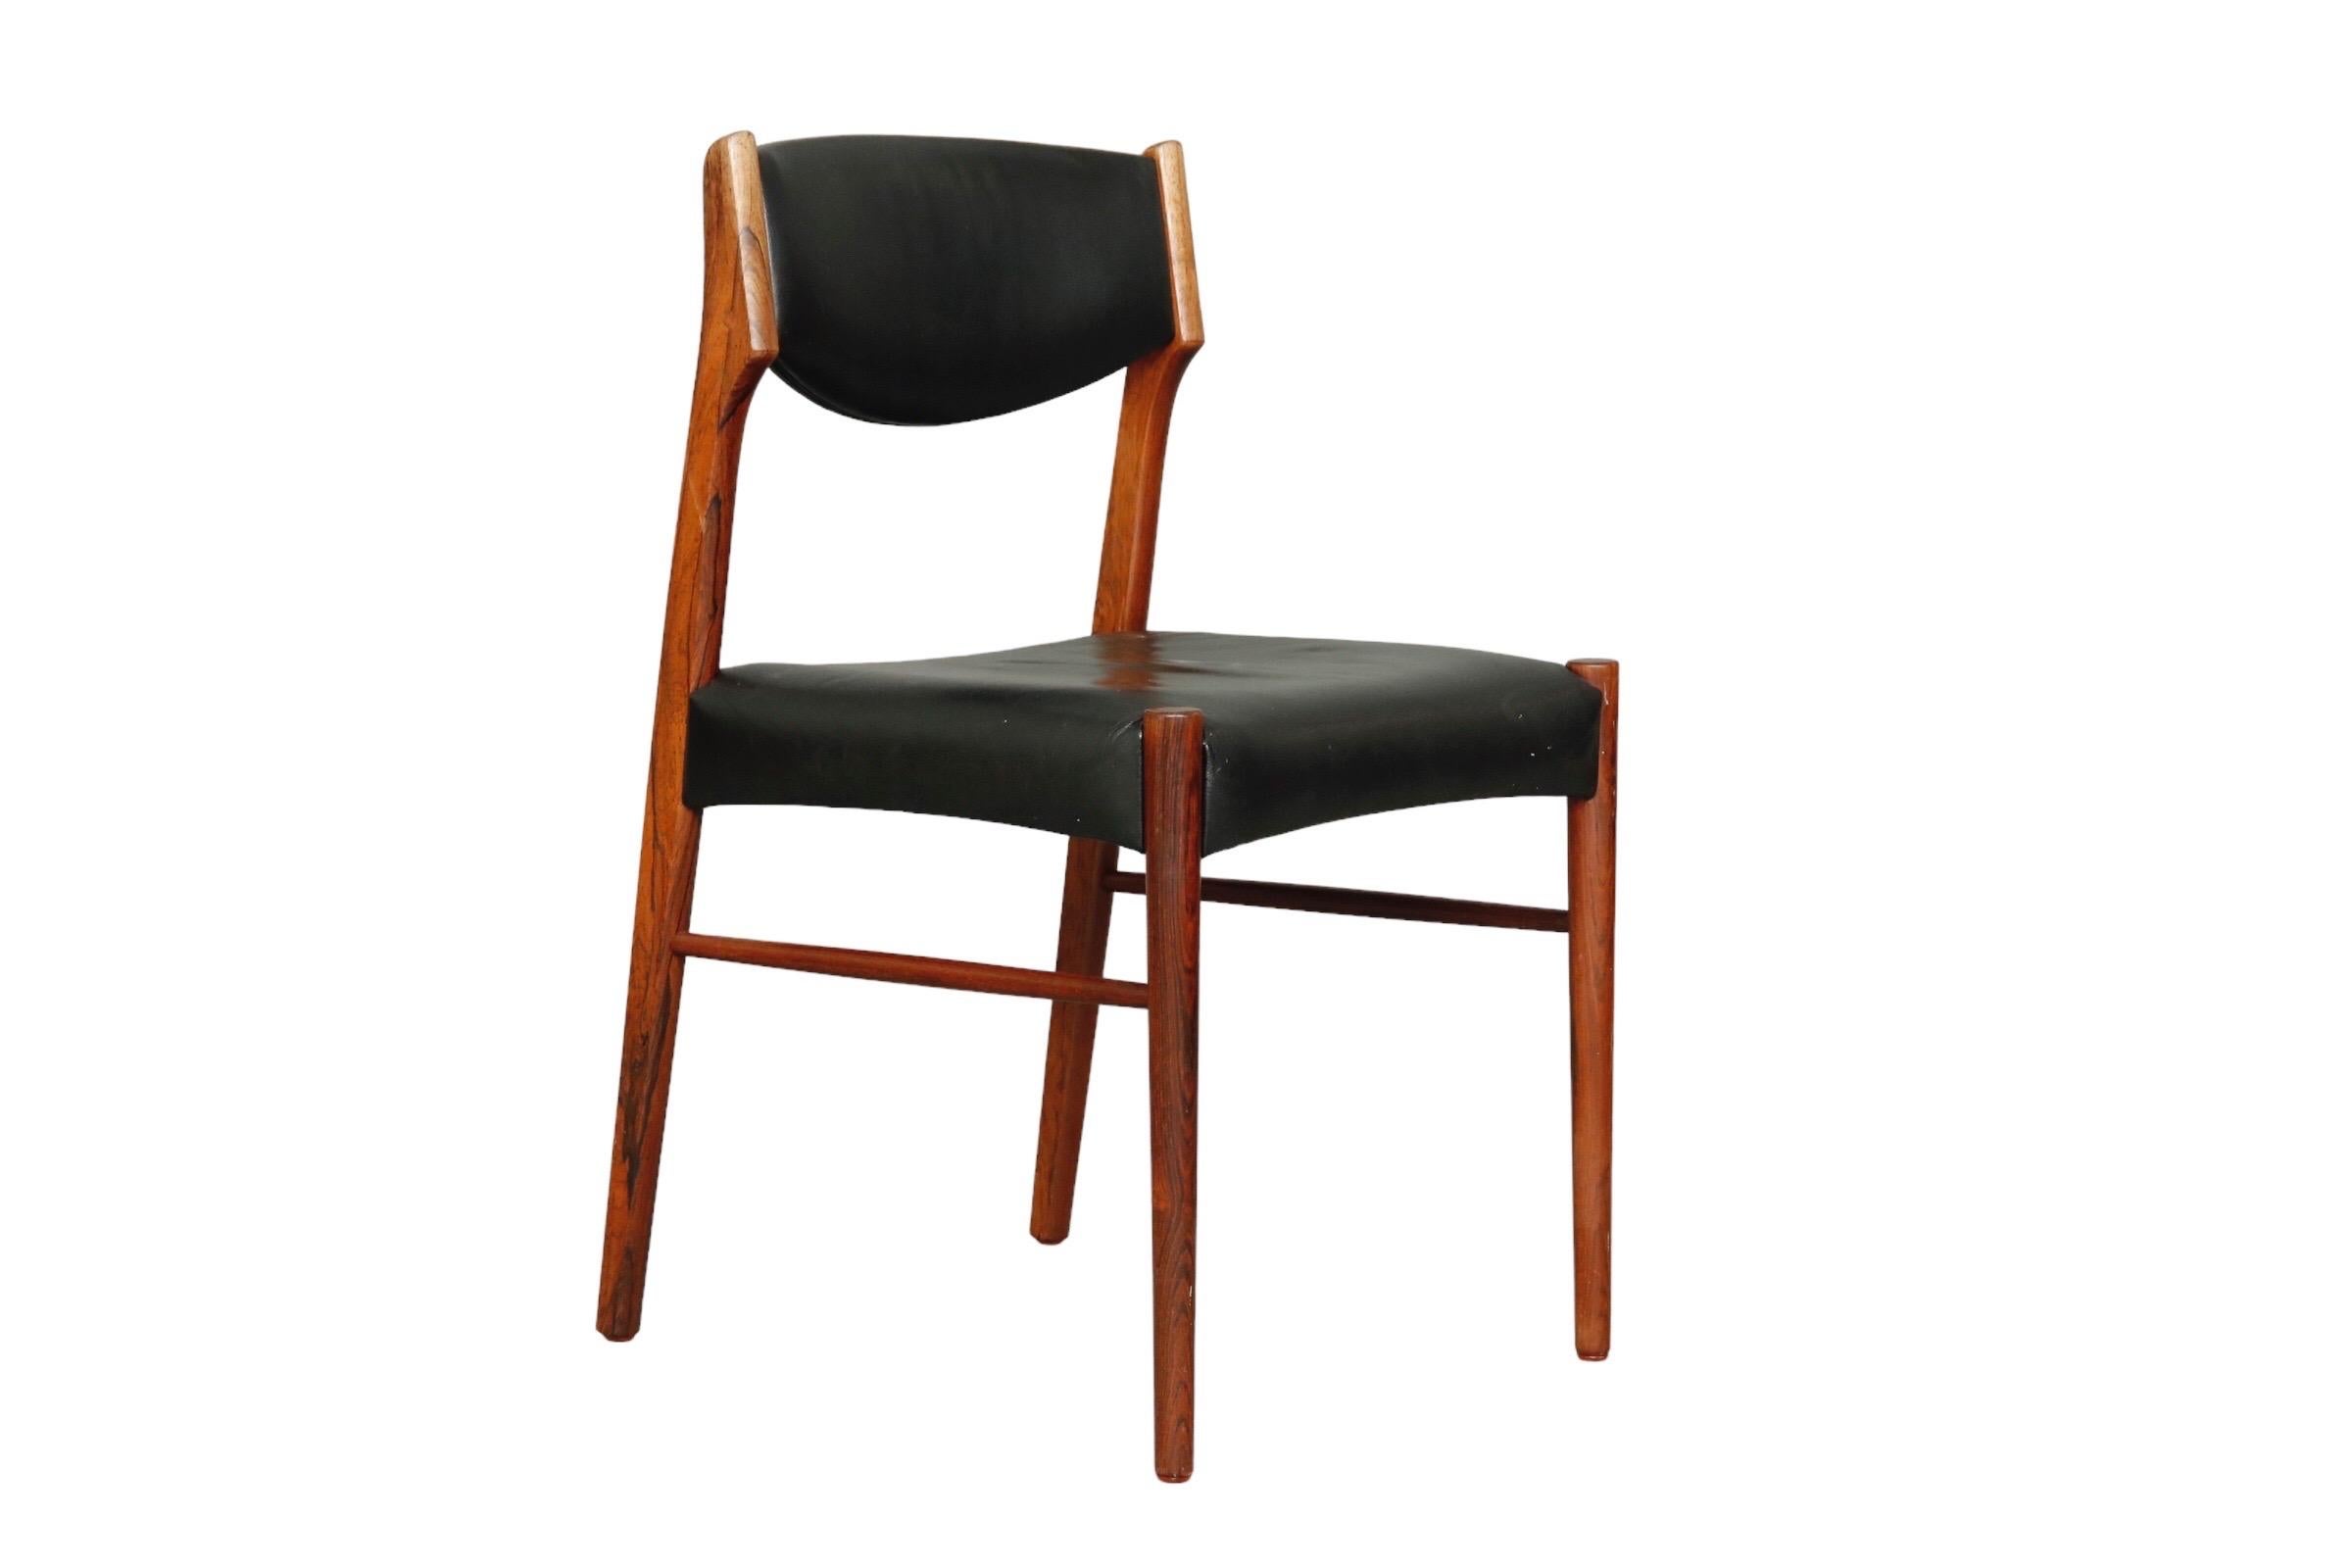 Set of six Saxkjobing Savvaerk Stolefabrik (SAX) mid century dining chairs made of rosewood. Clean lines throughout, the square seat and back upholstered in a black faux leather. Made in Denmark in the 1960s.

Measures: W:18”
D:18”
H:31” 
Seat